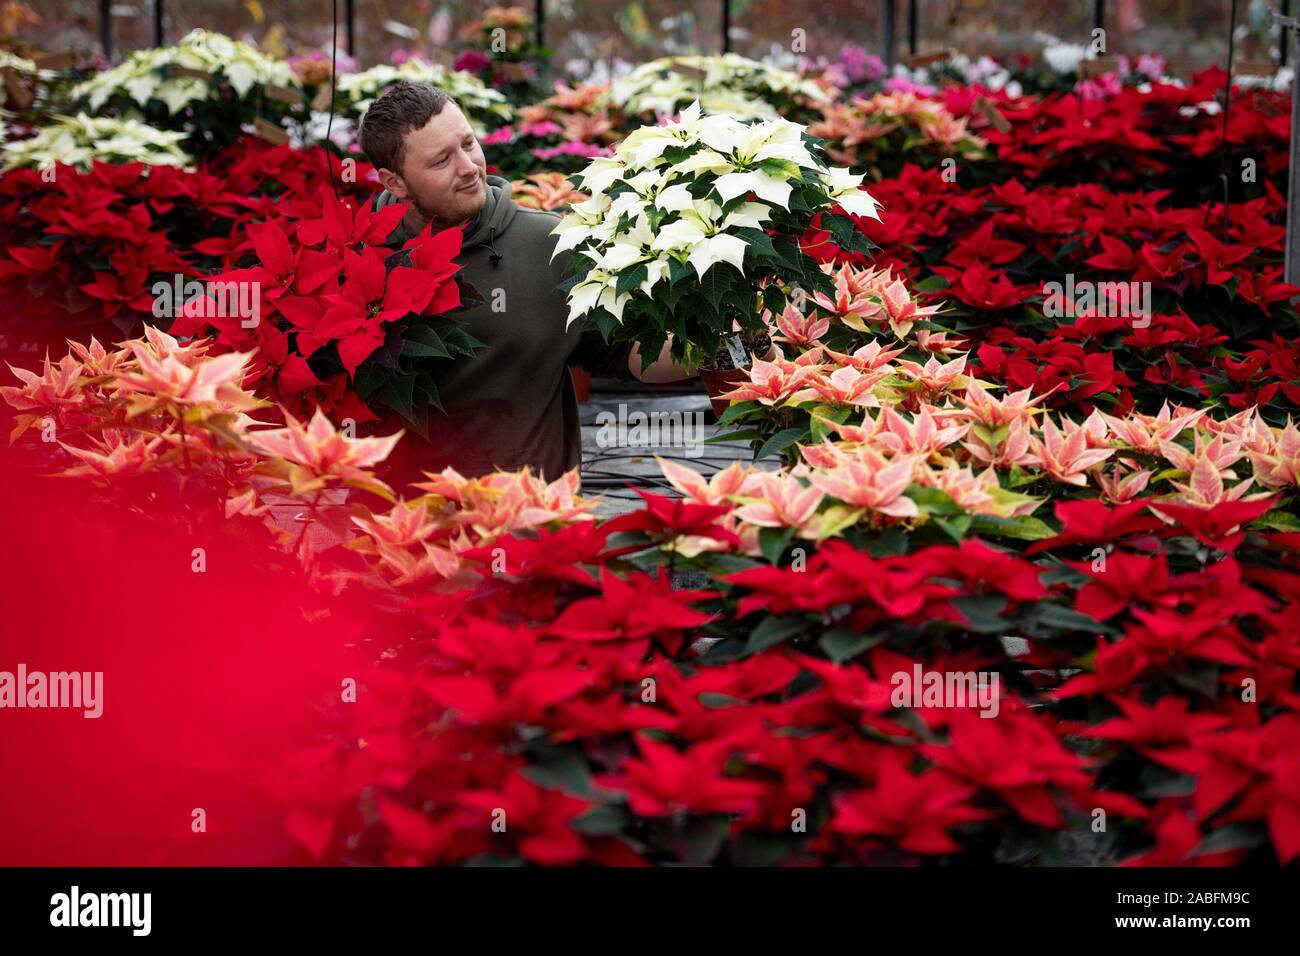 Thomas Walker, a fourth-generation nurseryman, checks some of the 23 different coloured varieties of Poinsettia plants on show at Meynell Langley Gardens in Ashbourne, Derbyshire. Stock Photo